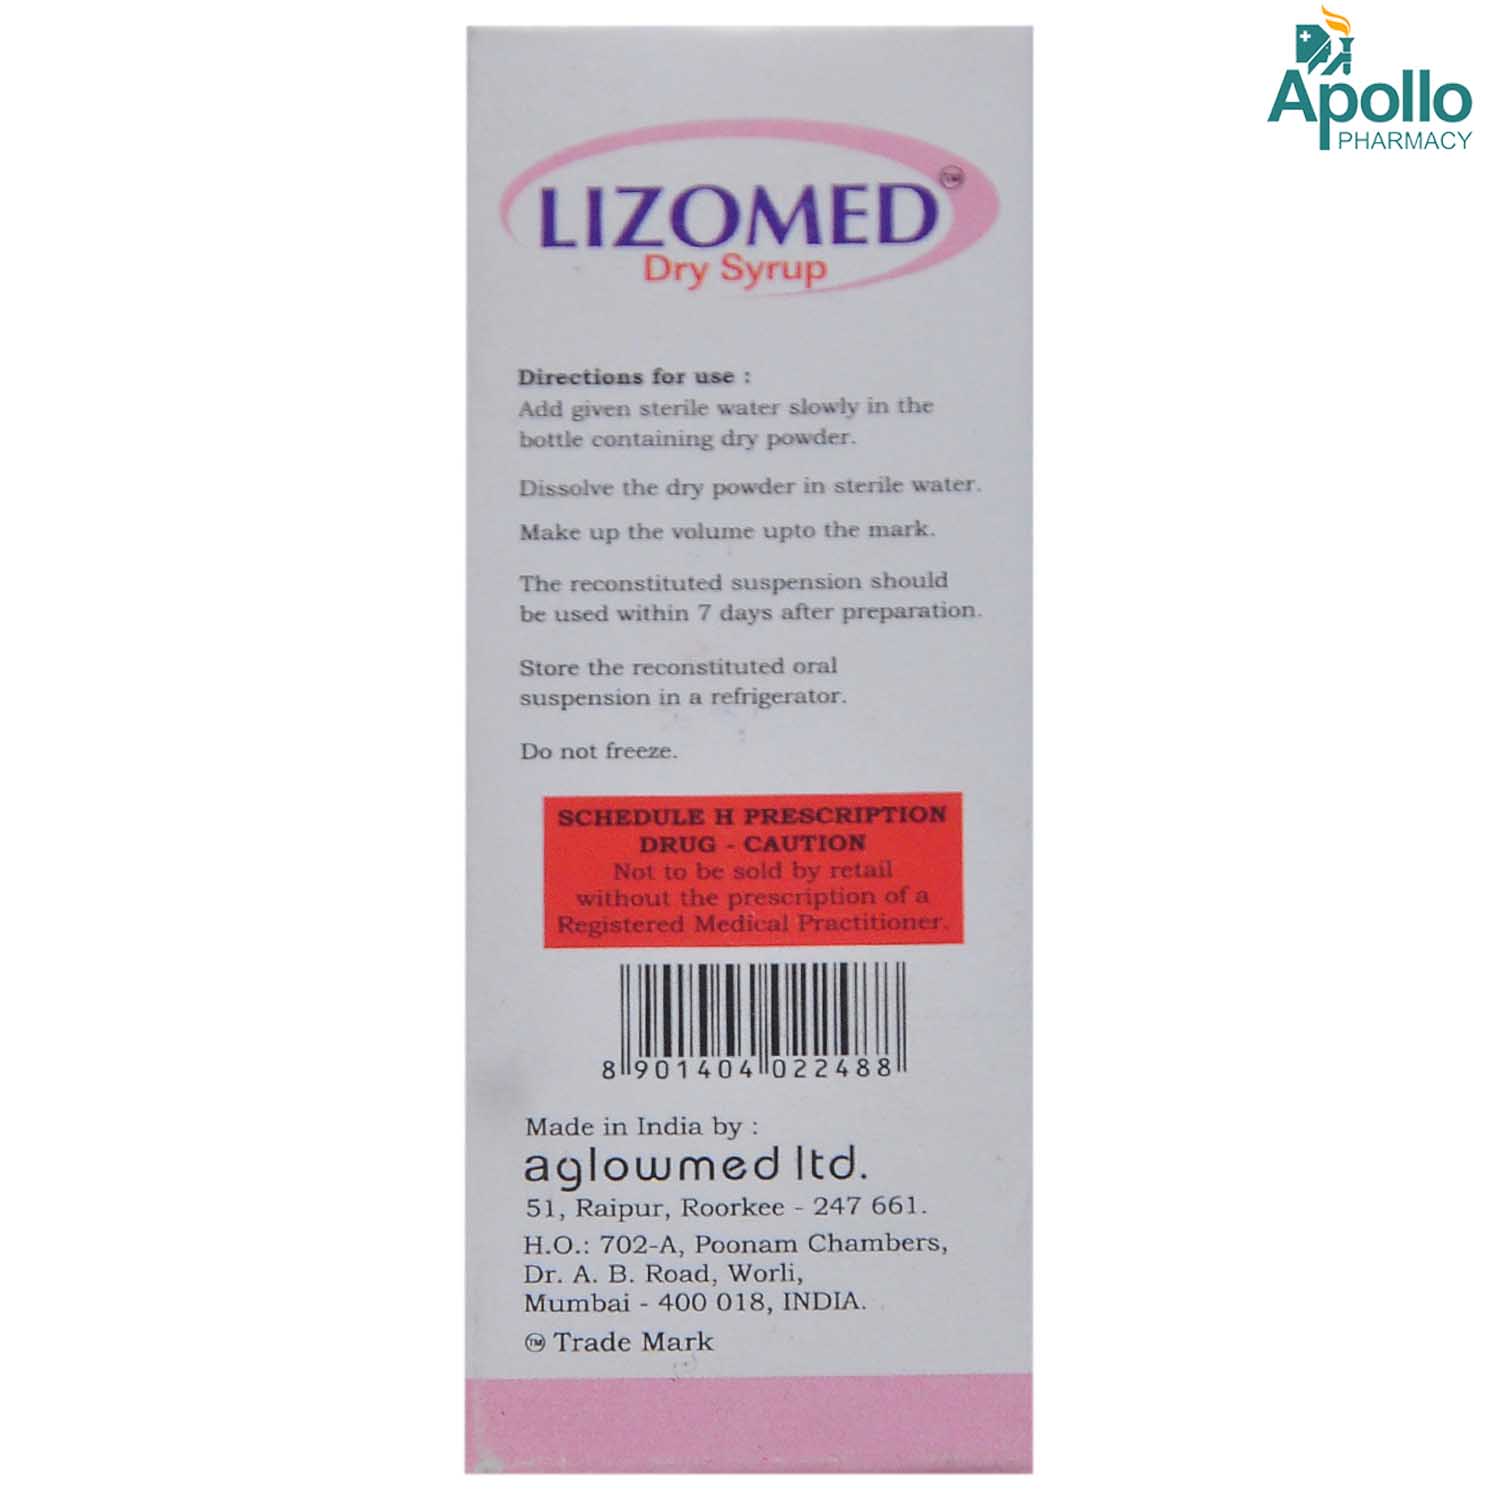 Lizomed Syrup 30ml Price Uses Side Effects Composition Apollo 24 7